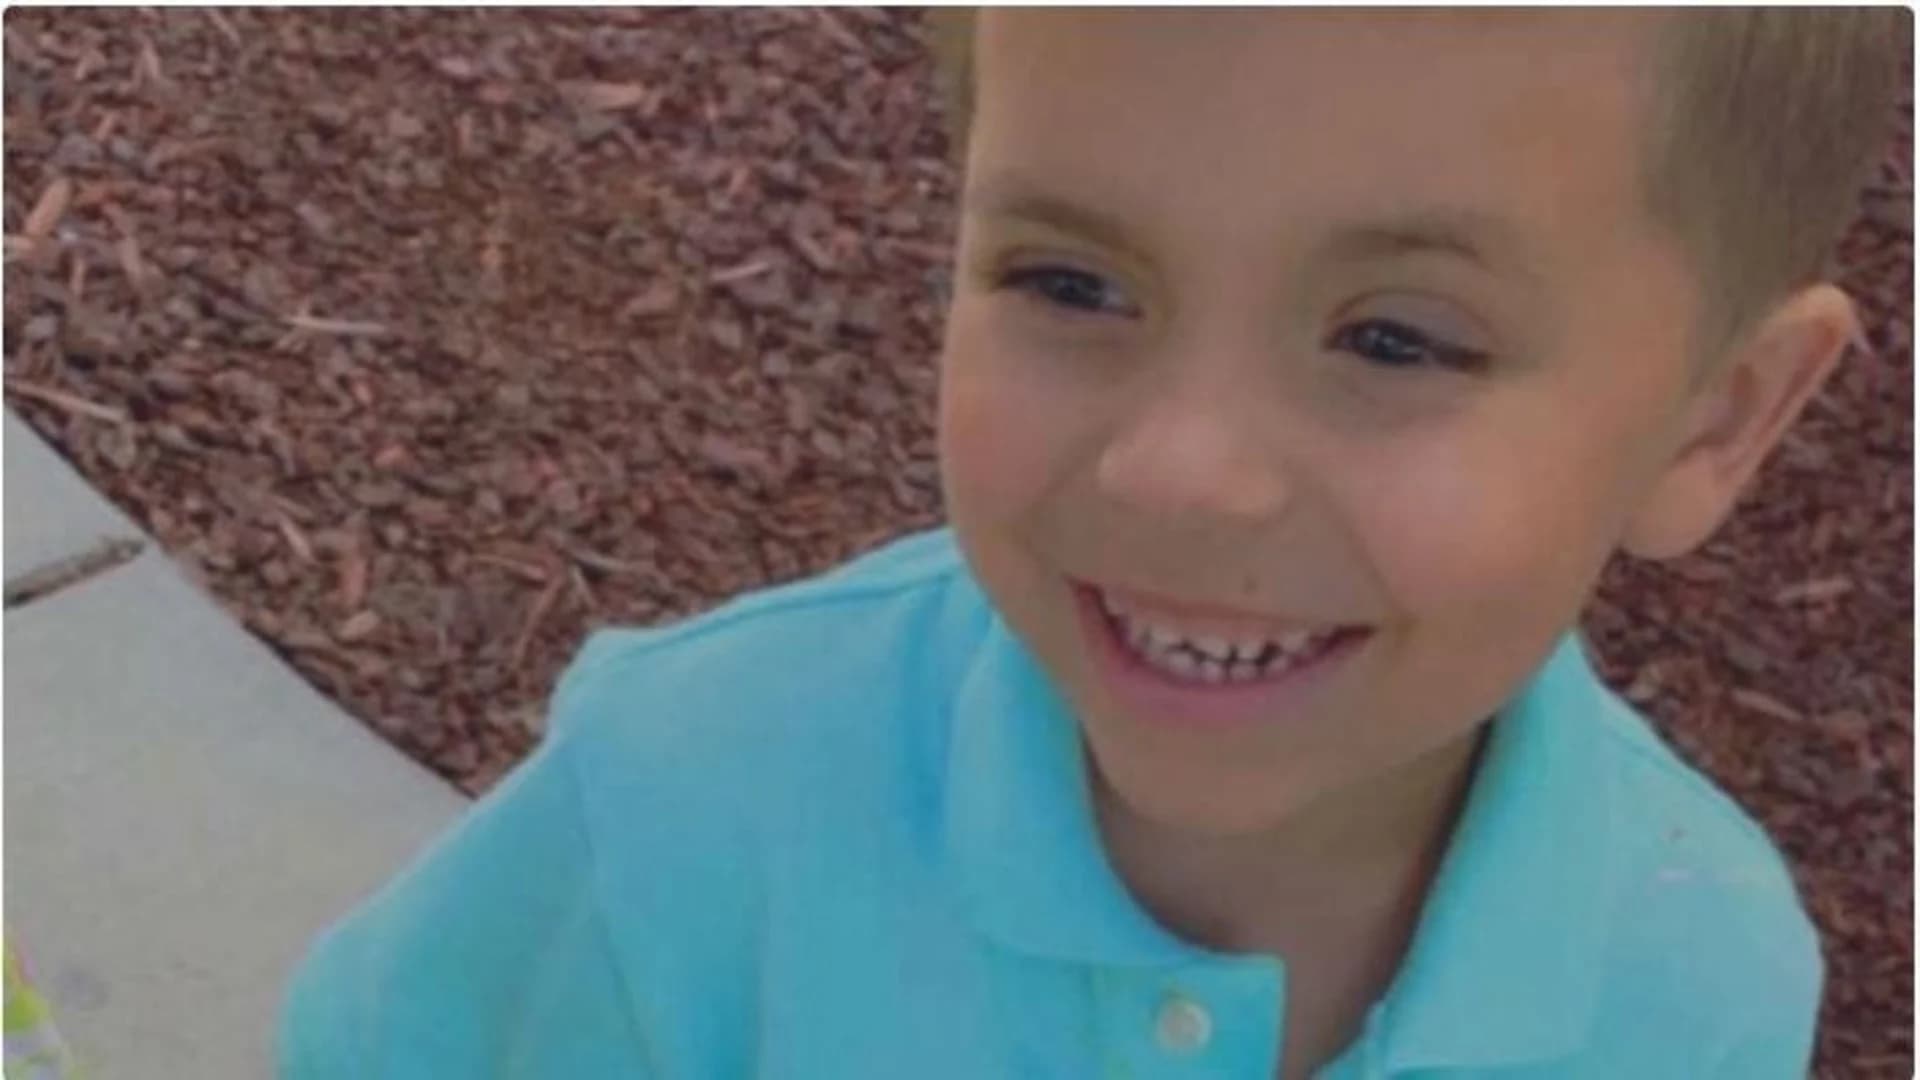 Funeral held for 5-year-old boy fatally shot in North Carolina